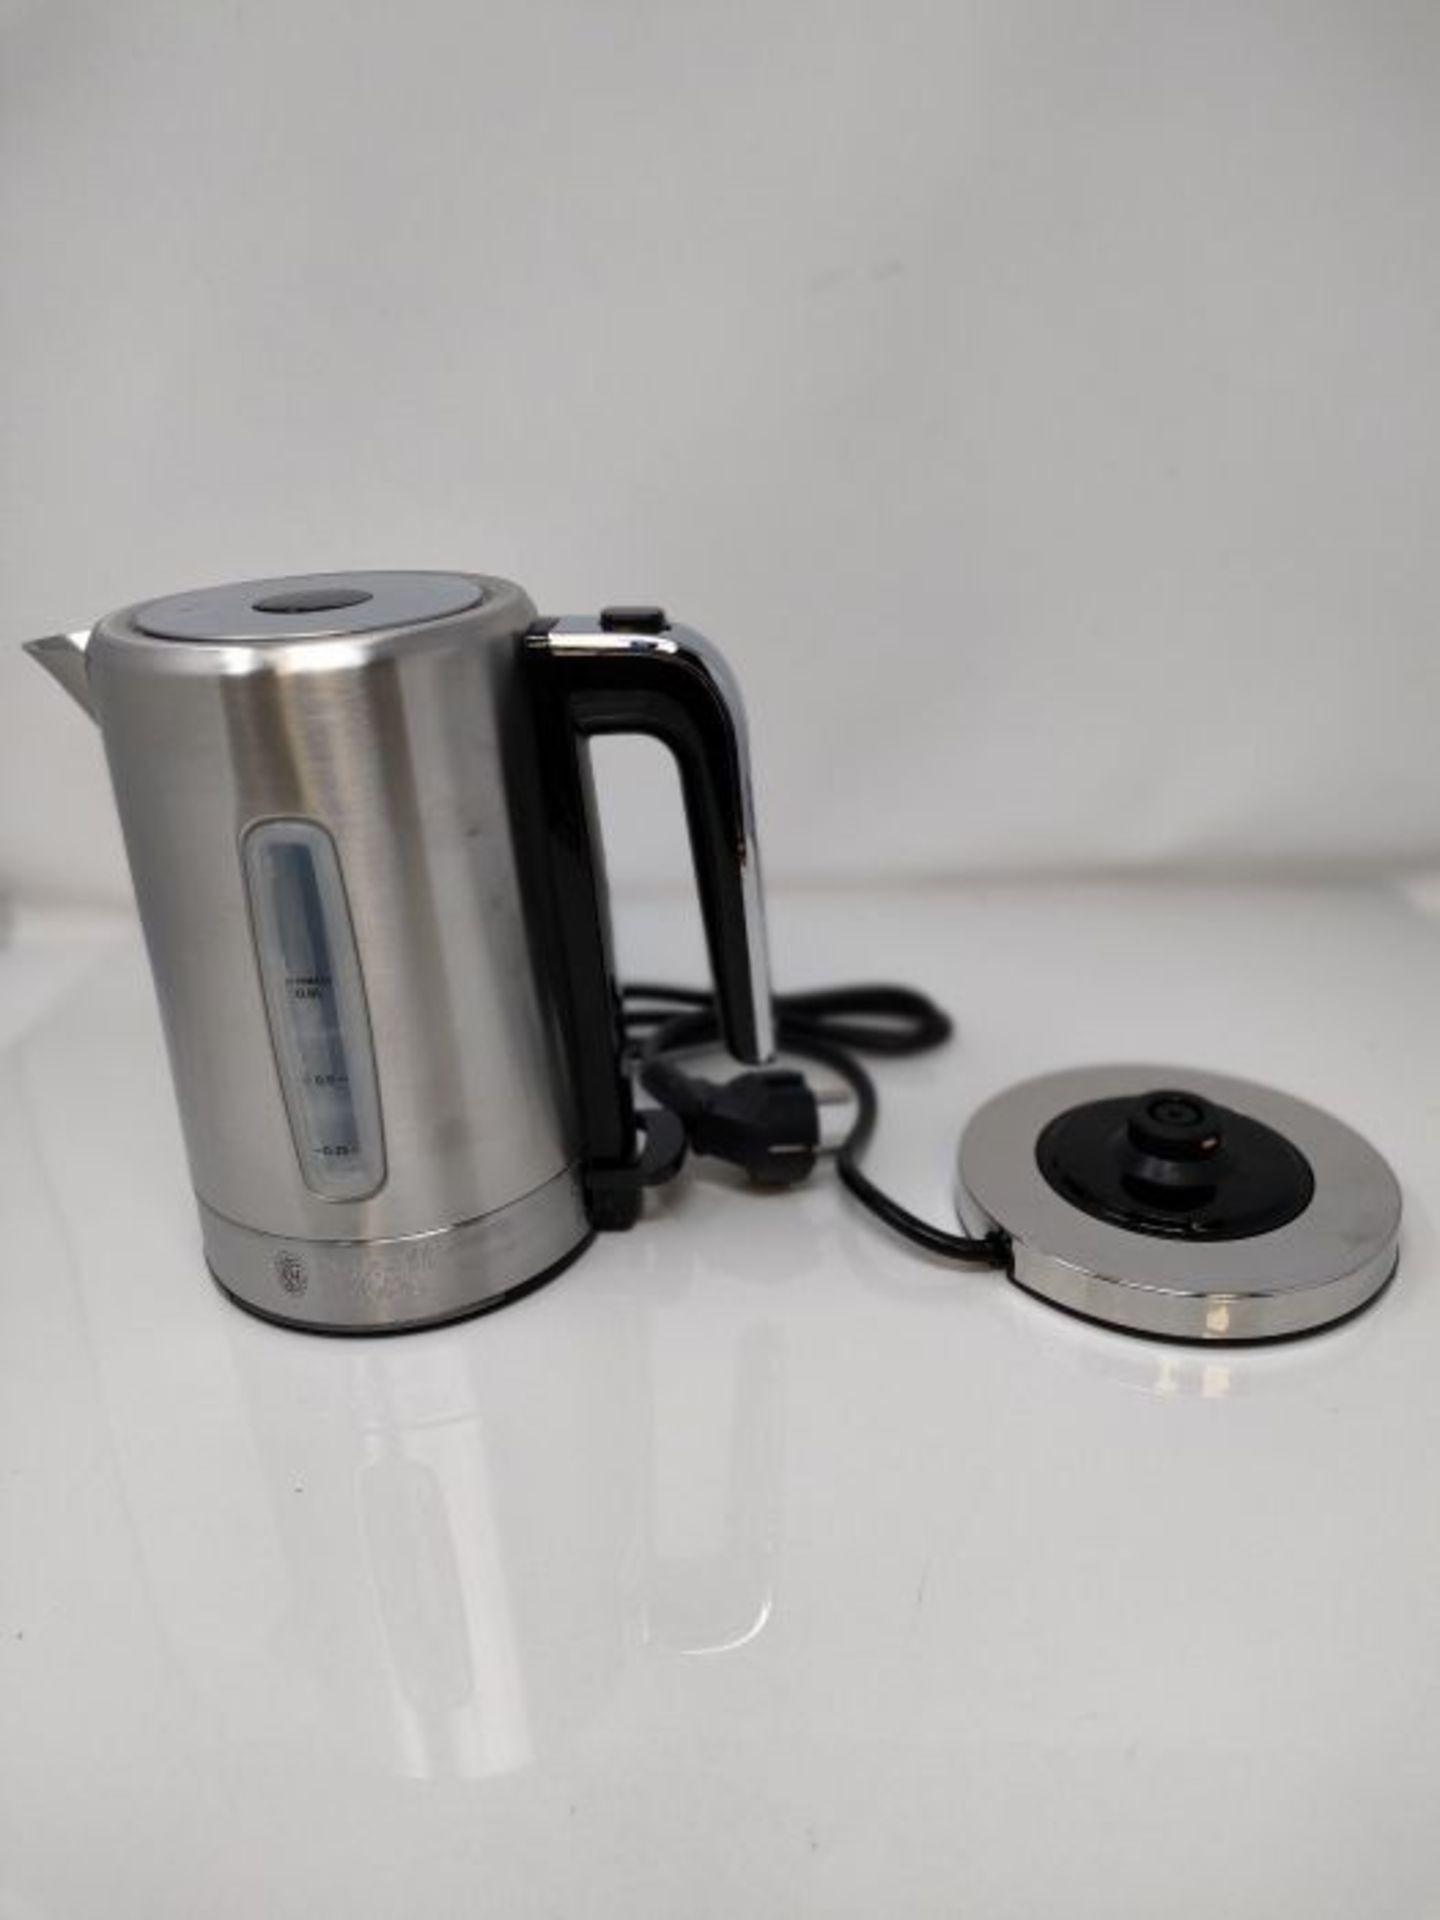 Russell Hobbs 24190-70 Cordless Kettle, 2200 W, Brushed Steel - Image 3 of 3